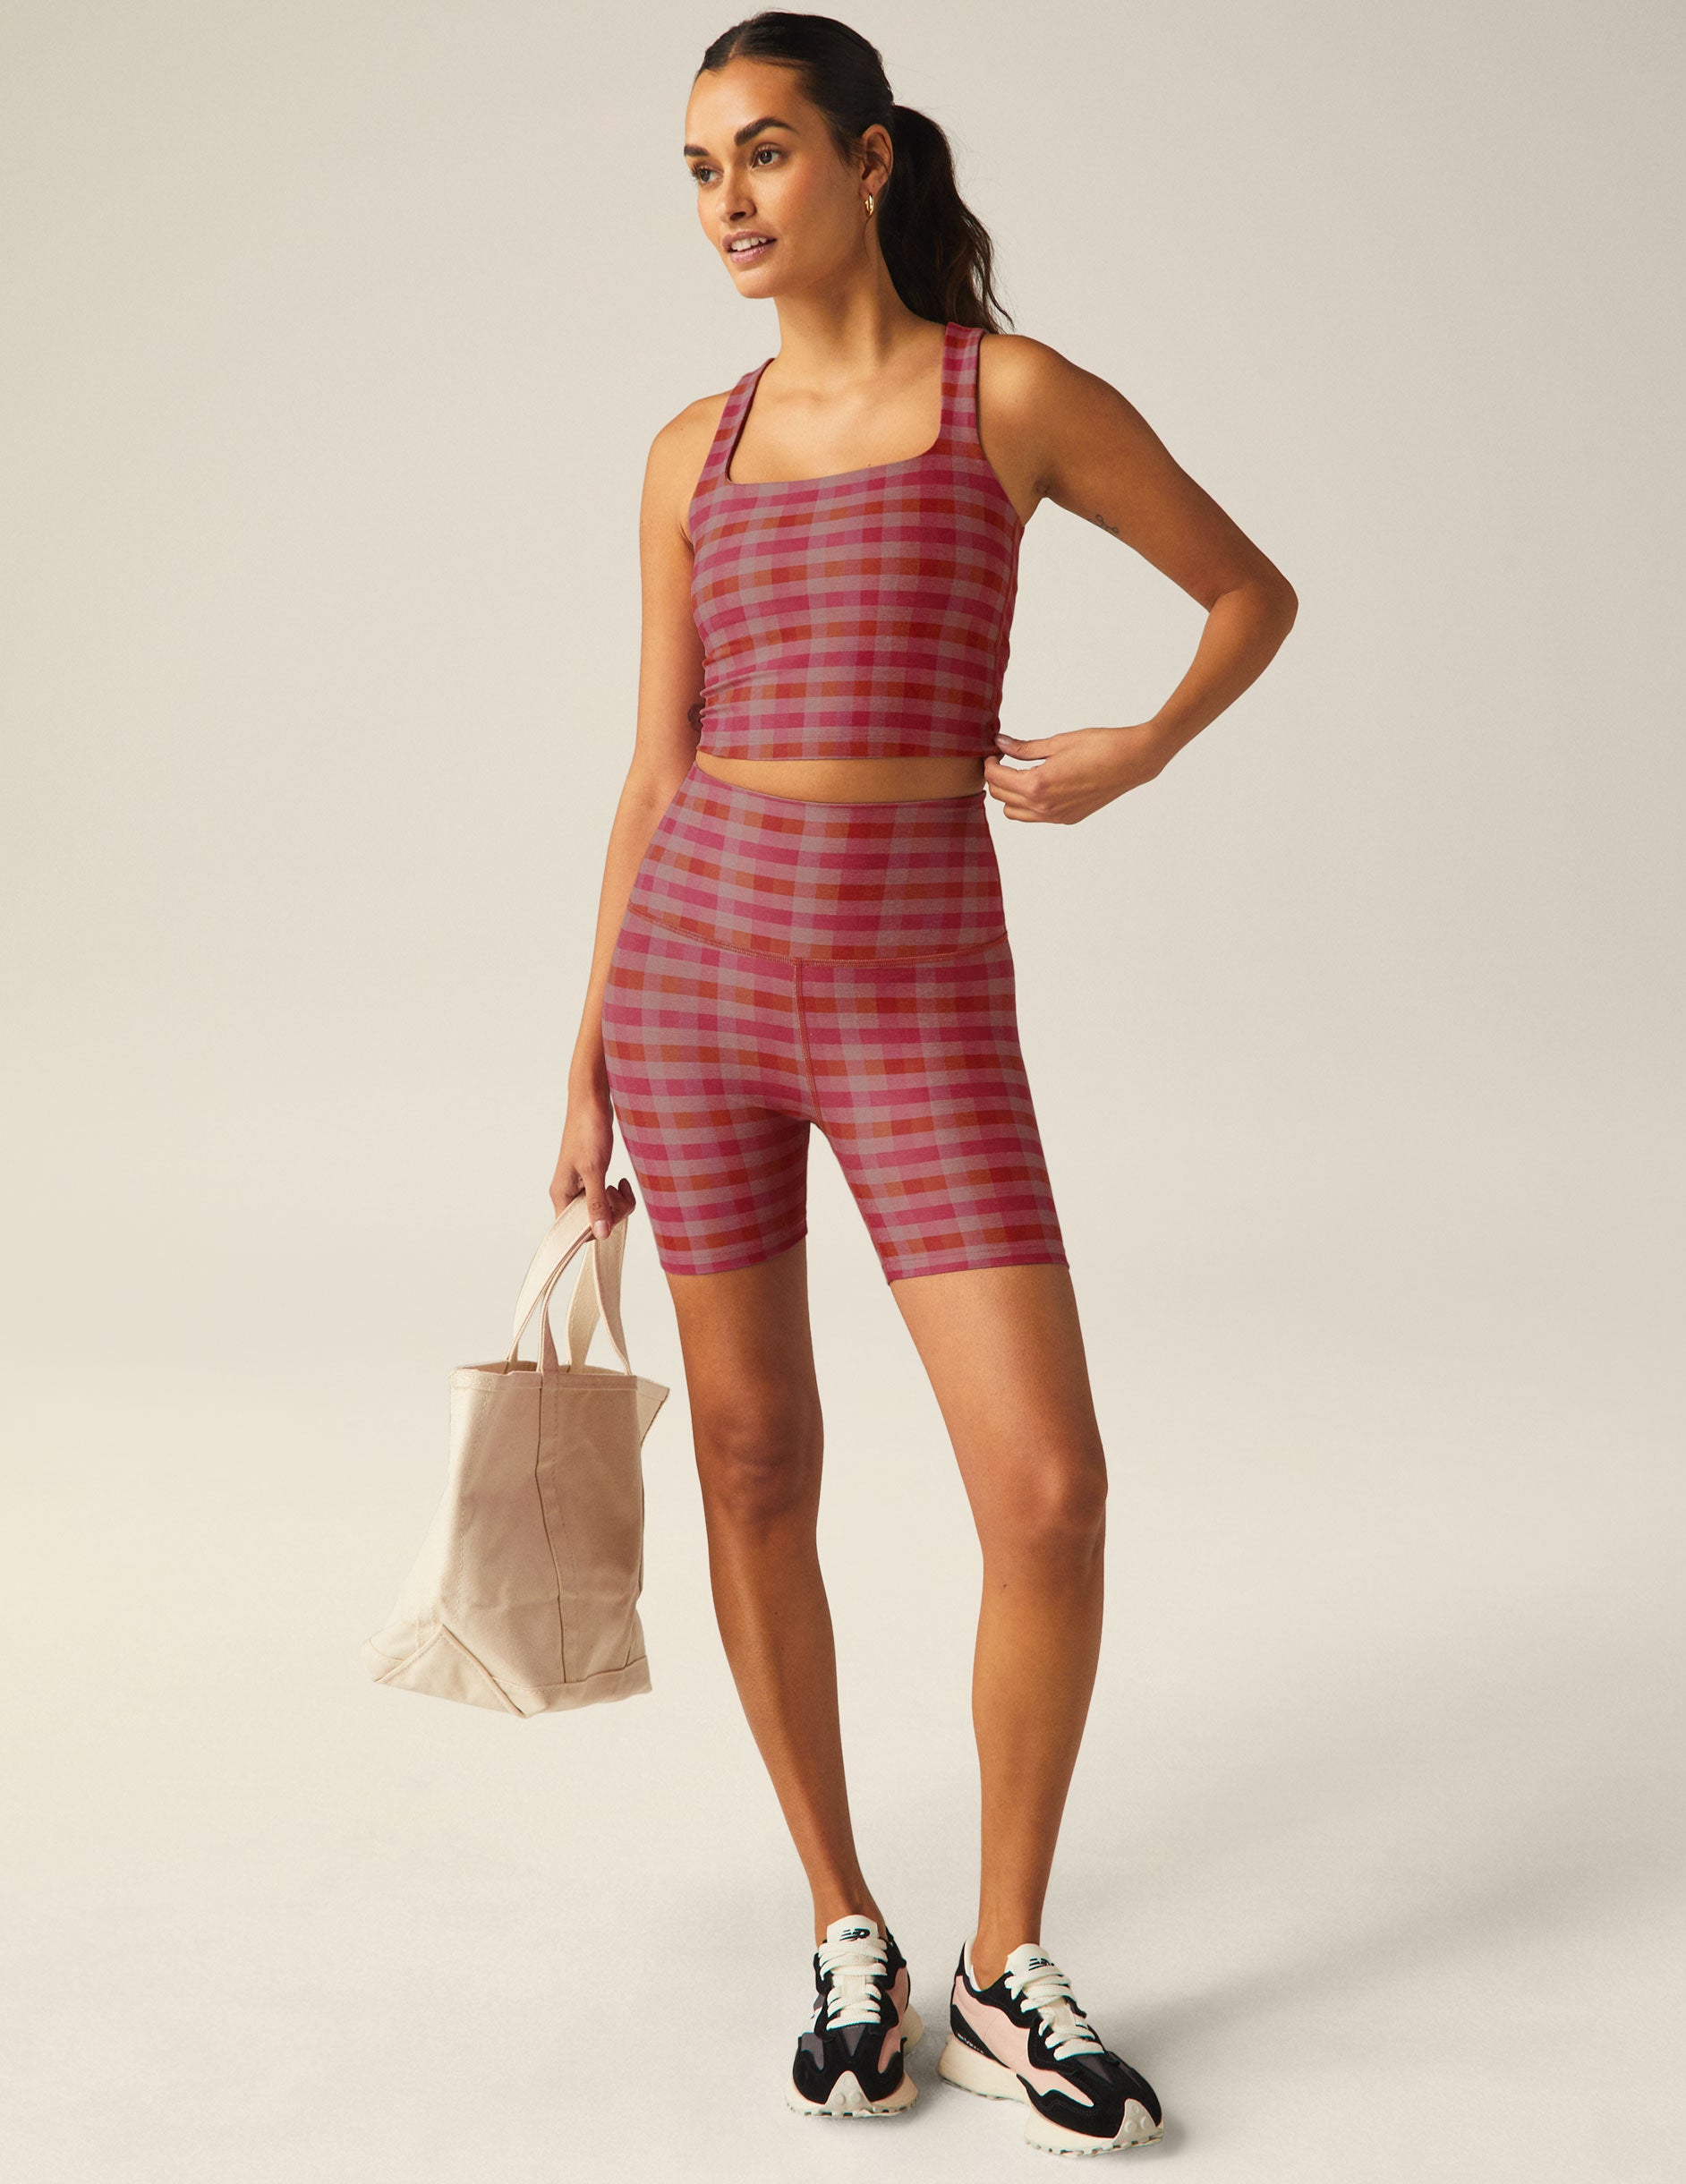 pink gingham patterned square neck cropped tank top.